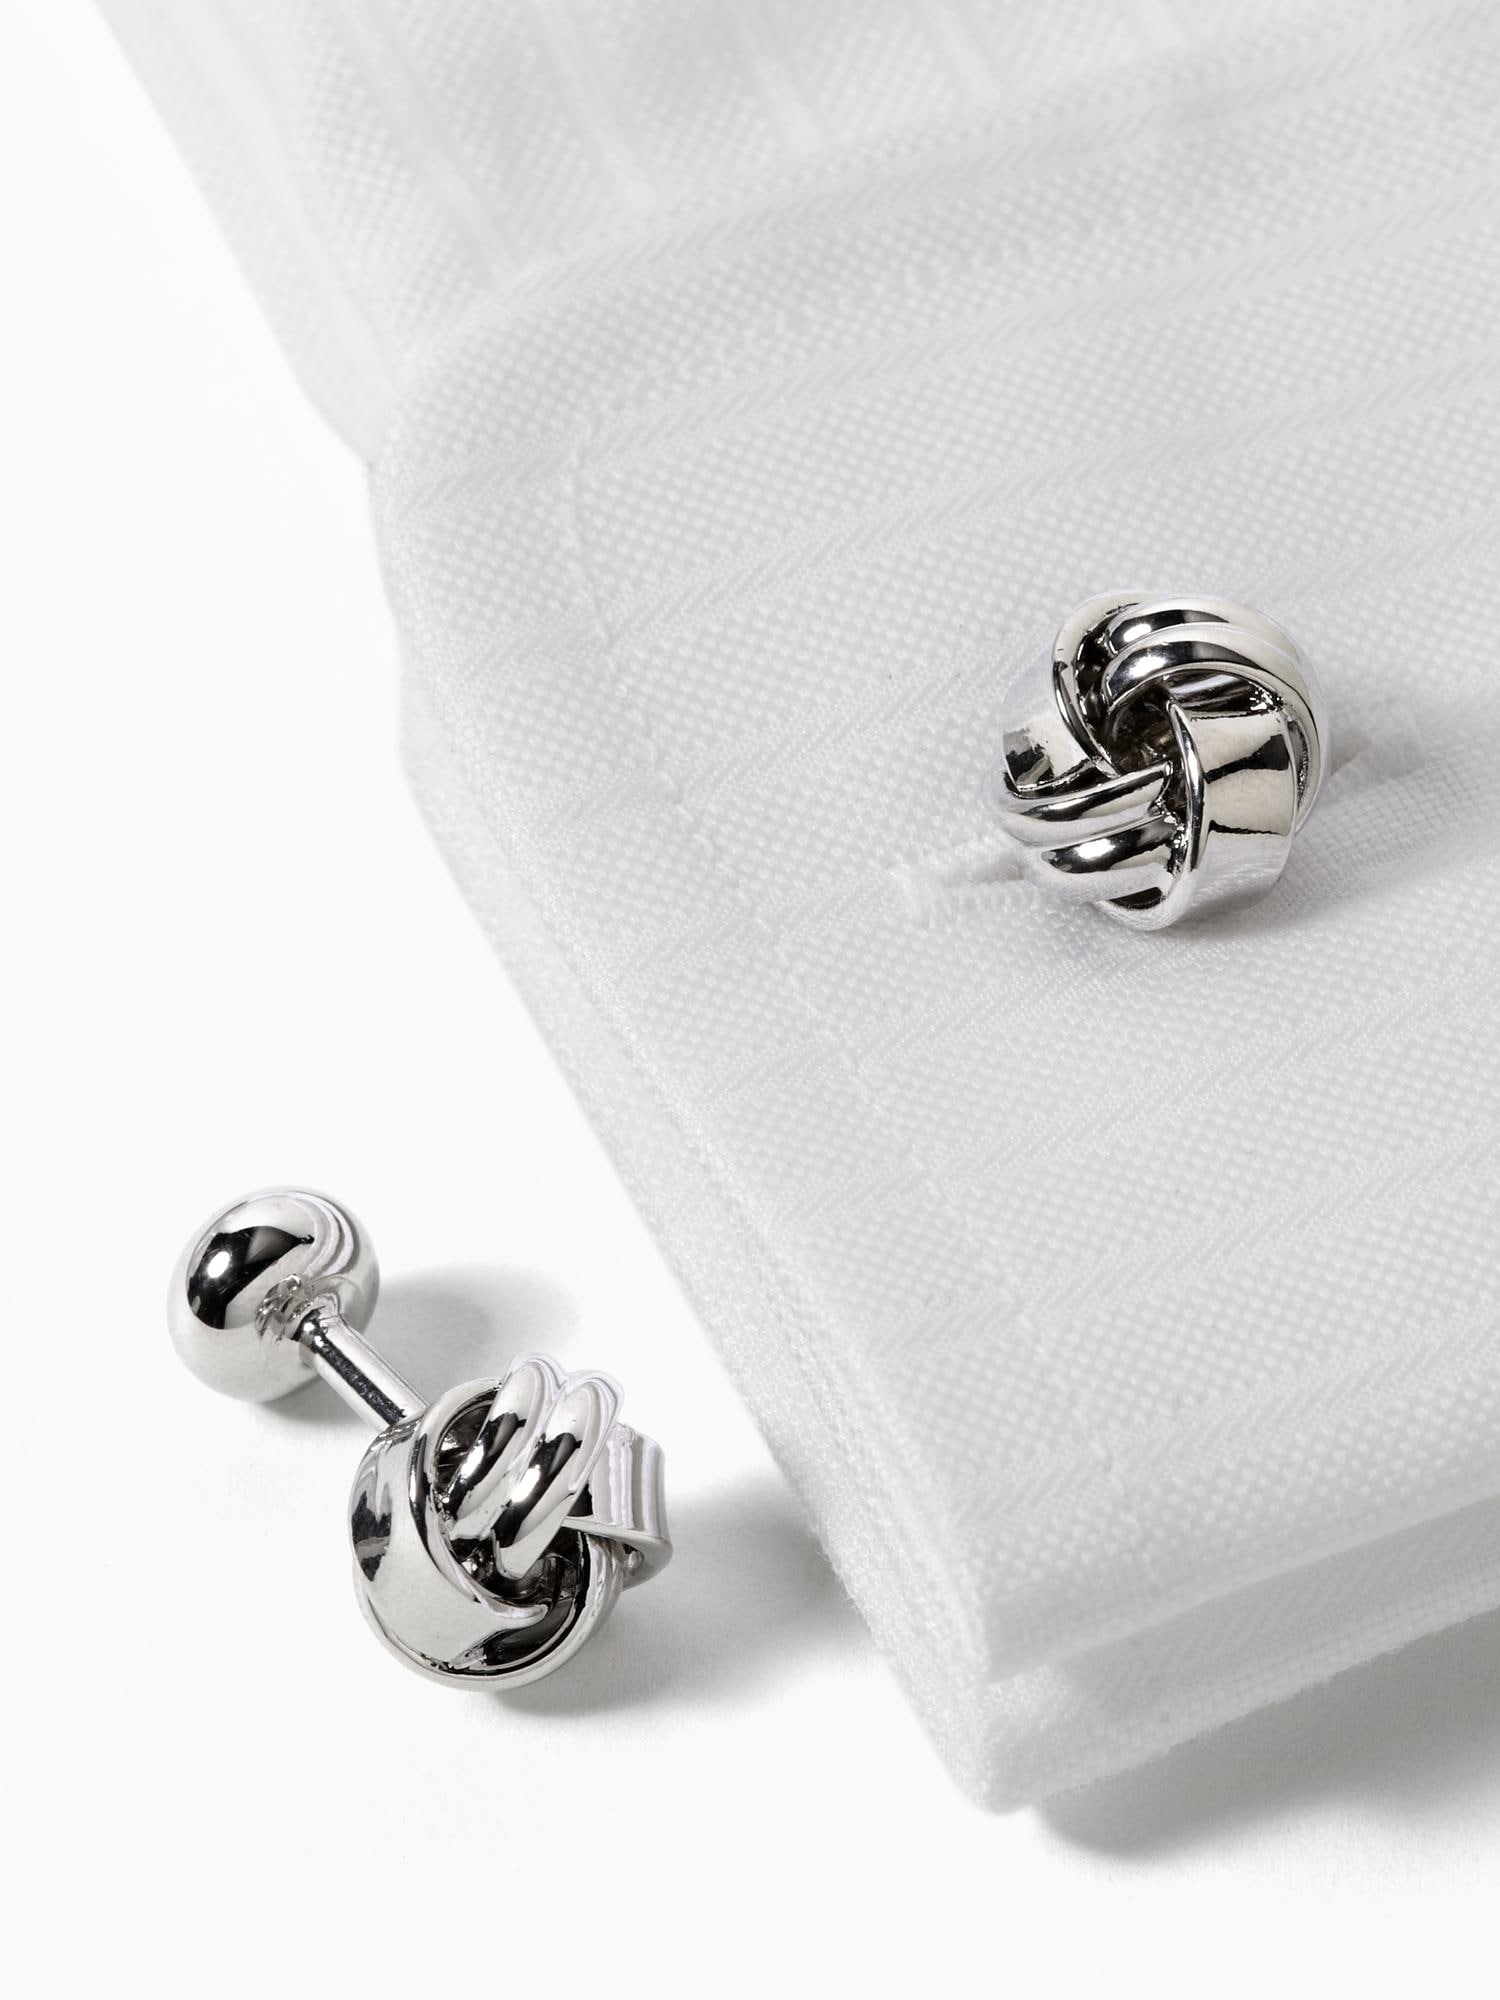 Twisted Knot Cuff Links